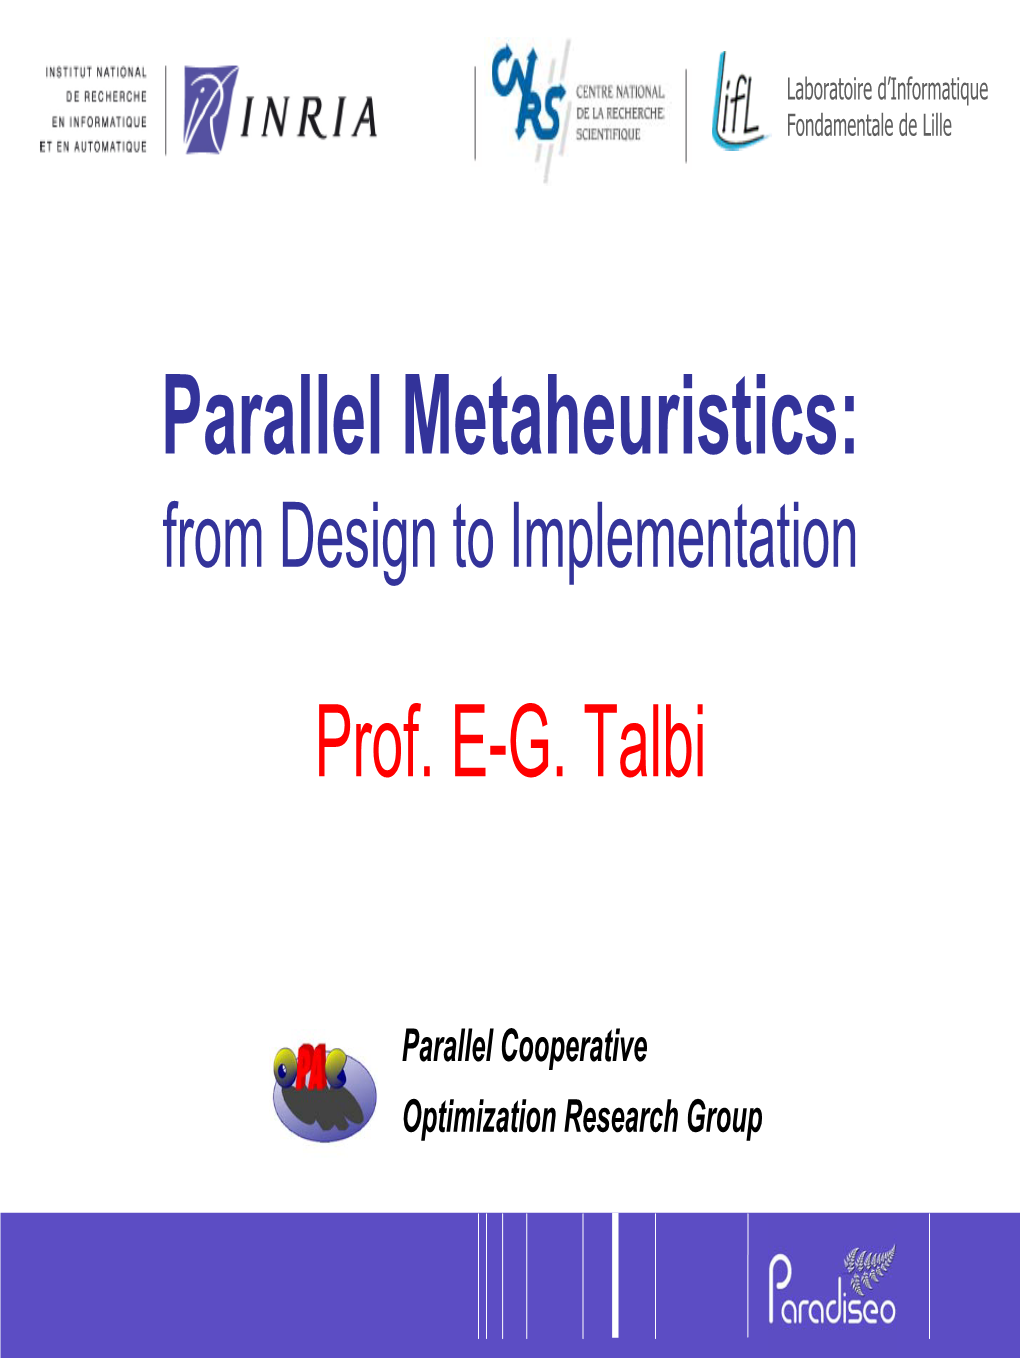 Parallel Metaheuristics: from Design to Implementation